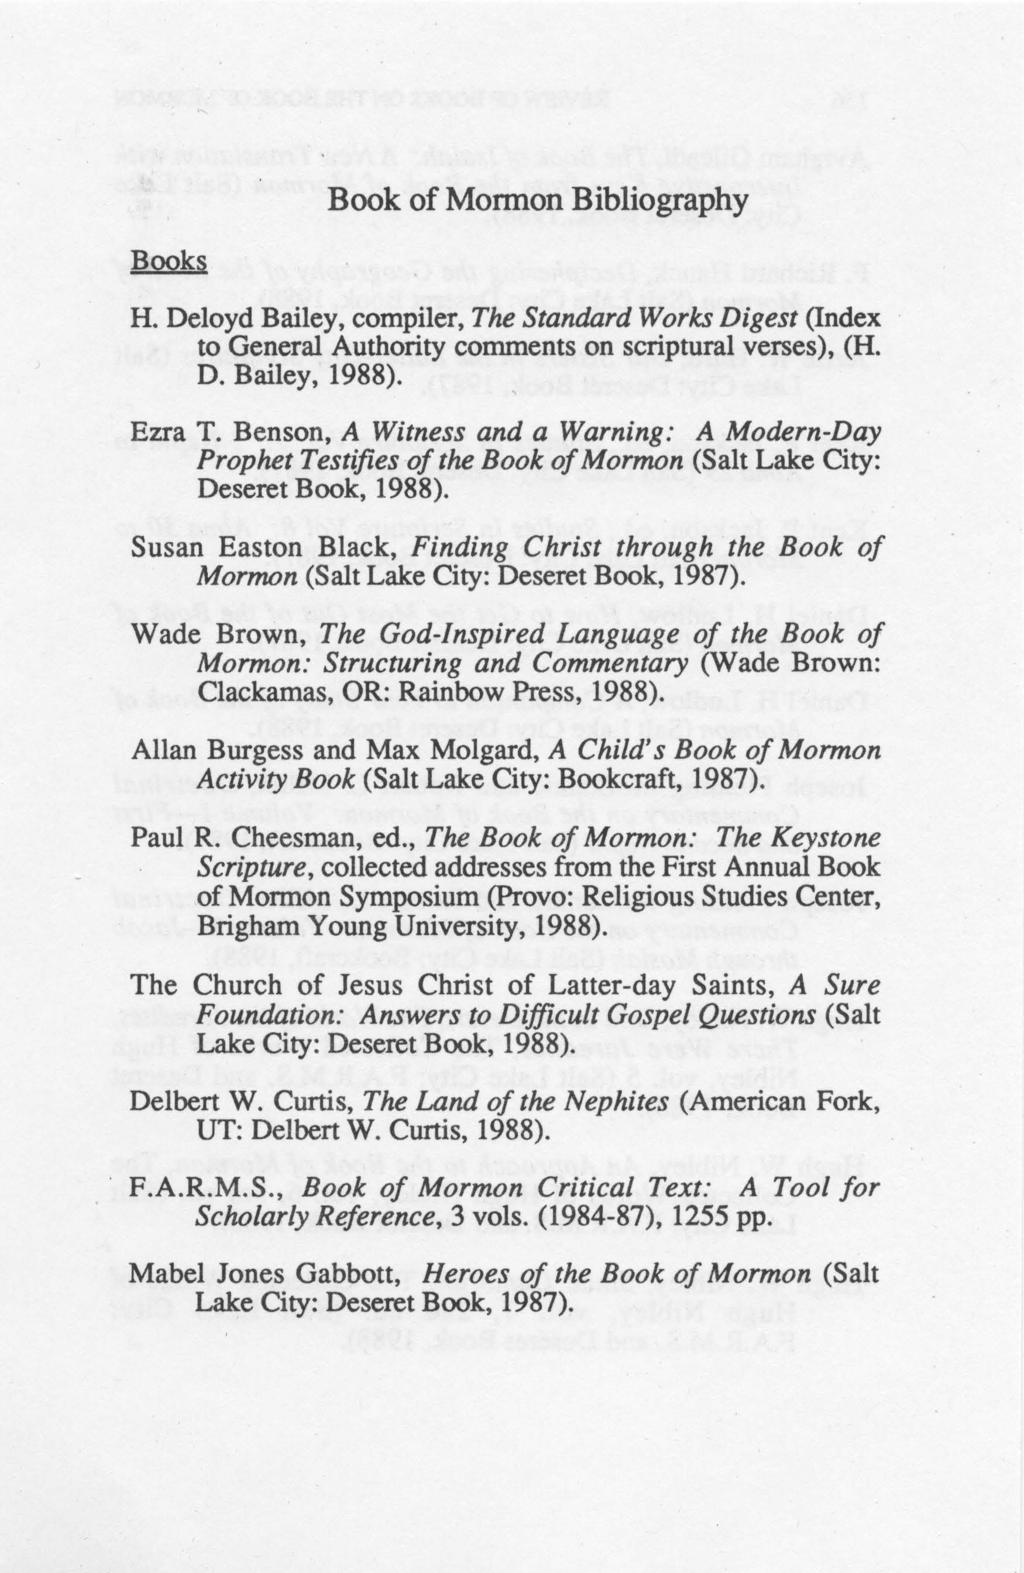 Book of Mormon Bibliography Books H. Deloyd Bailey, compiler, The Standard Works Digest (Index to General Authority comments on scriptural verses), (H. D. Bailey, 1988). Ezra T.